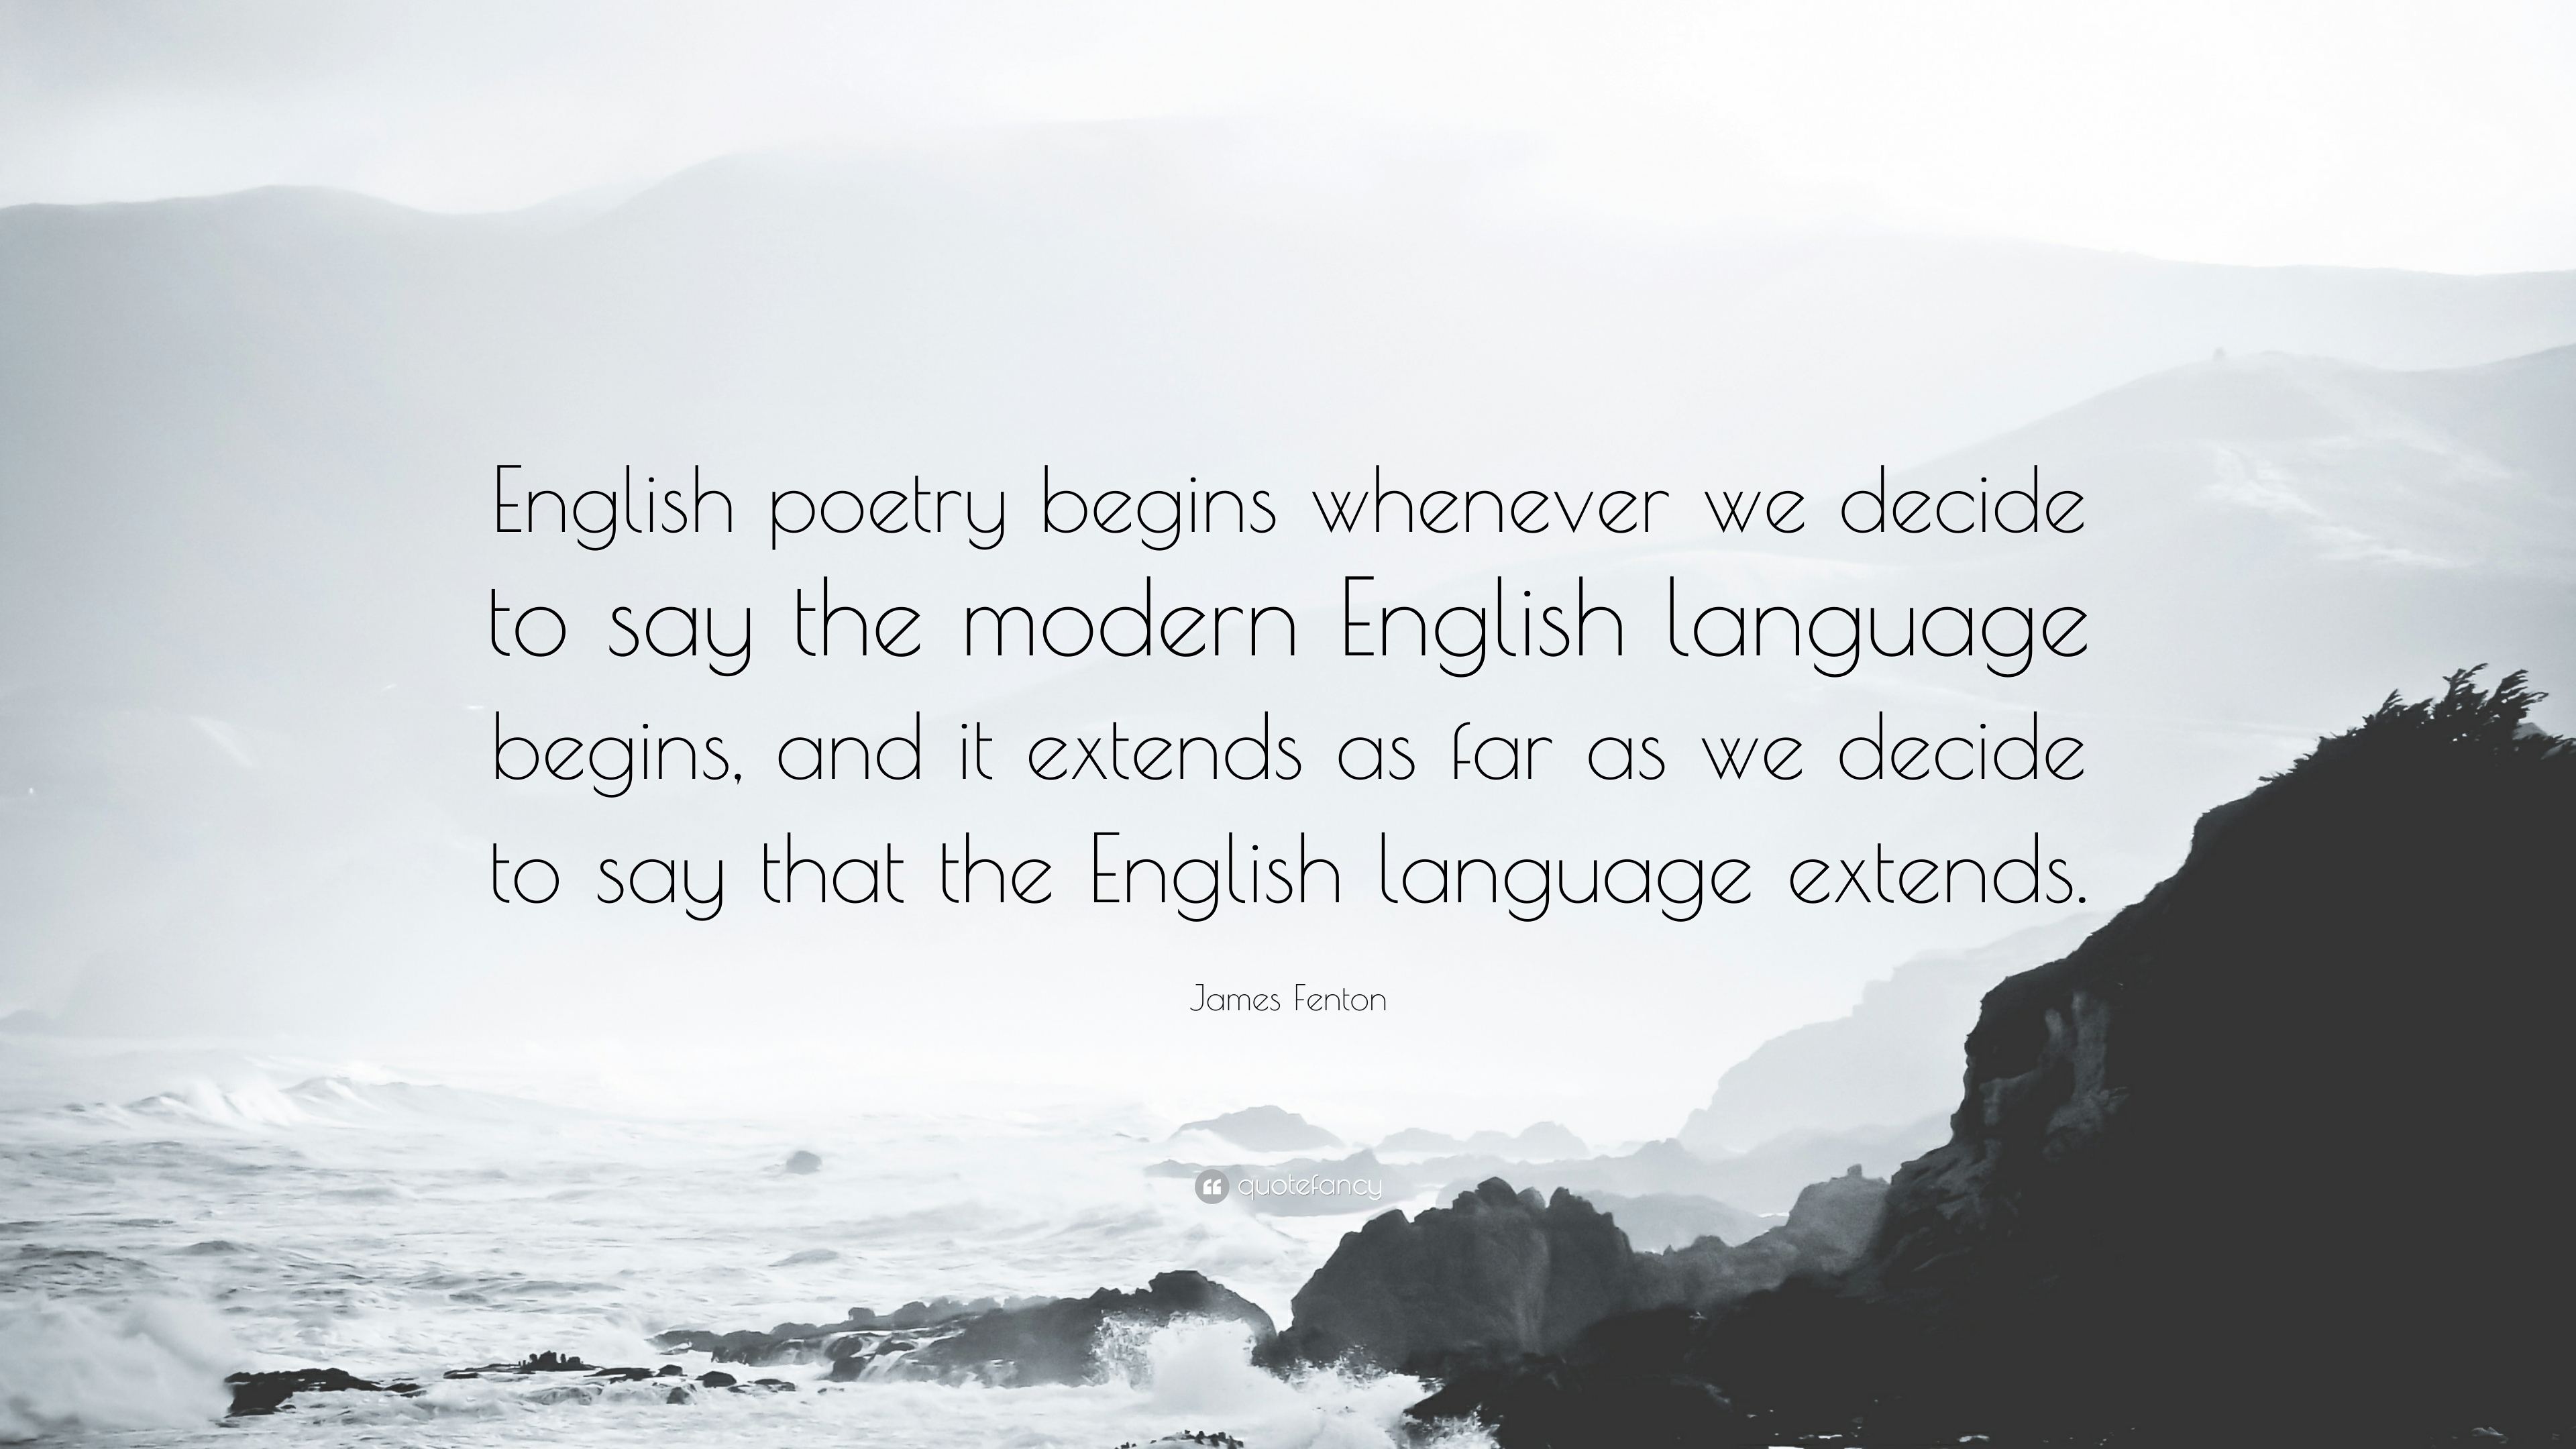 James Fenton Quote: “English poetry begins whenever we decide to say